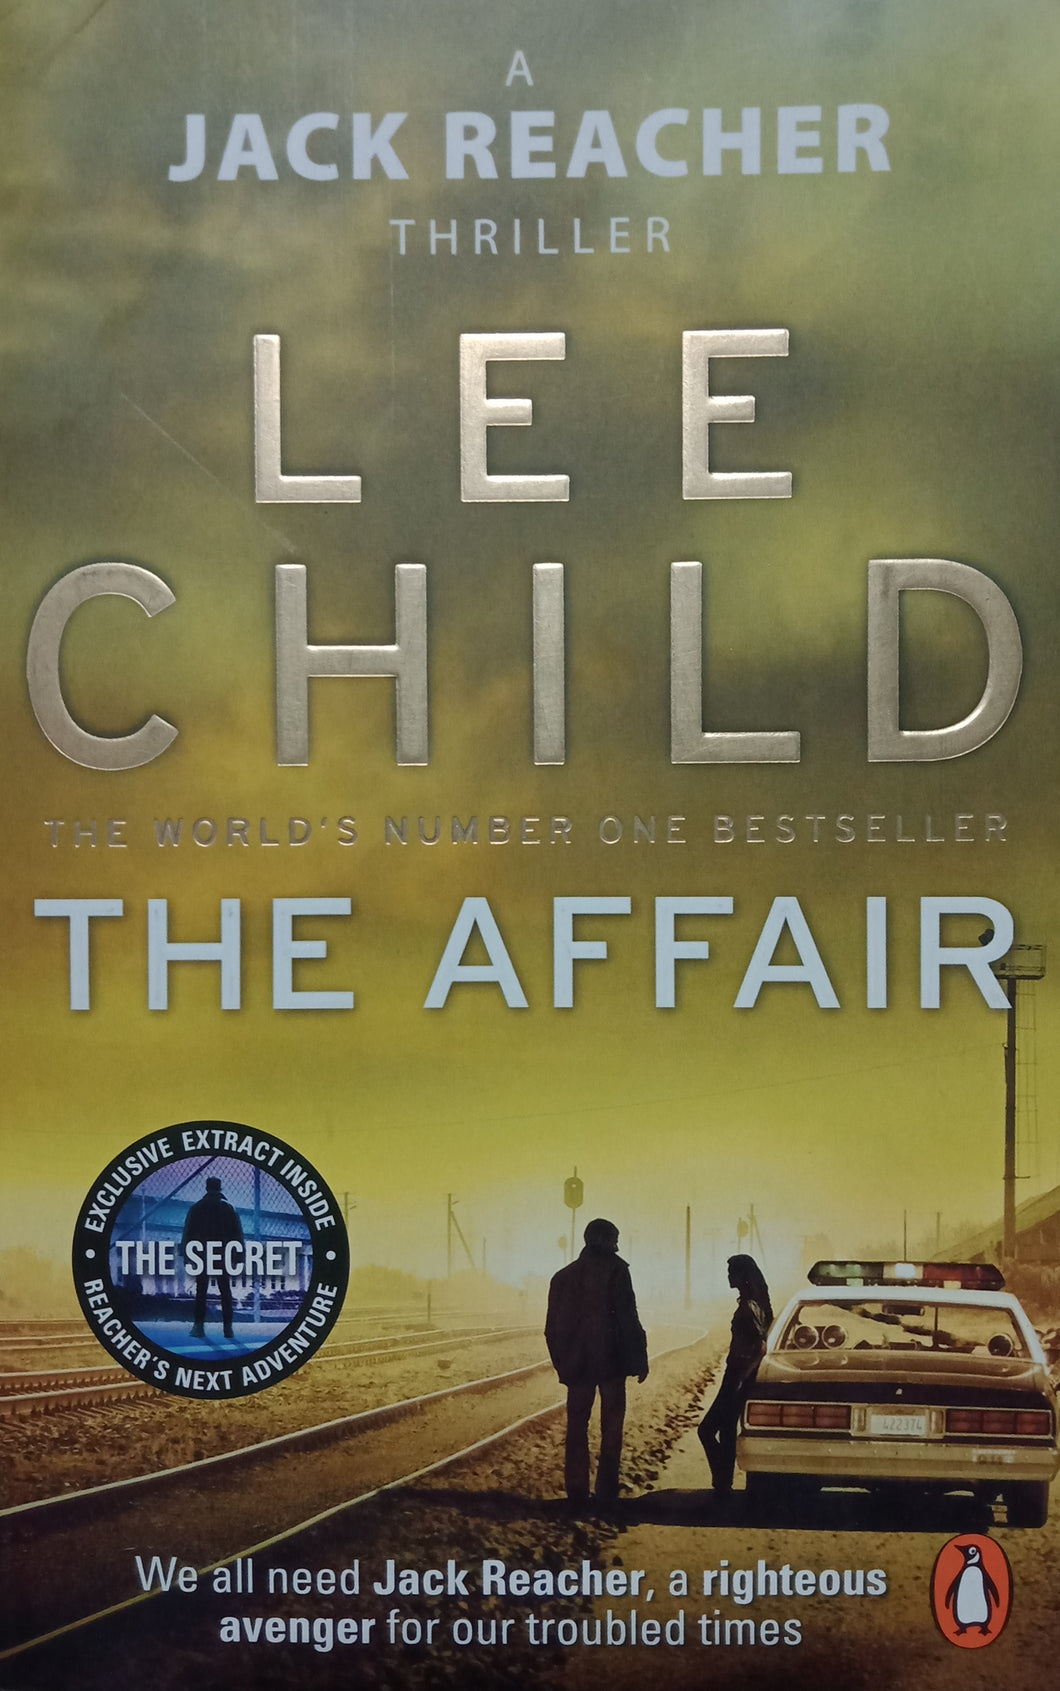 The Affair by Lee Child 62A